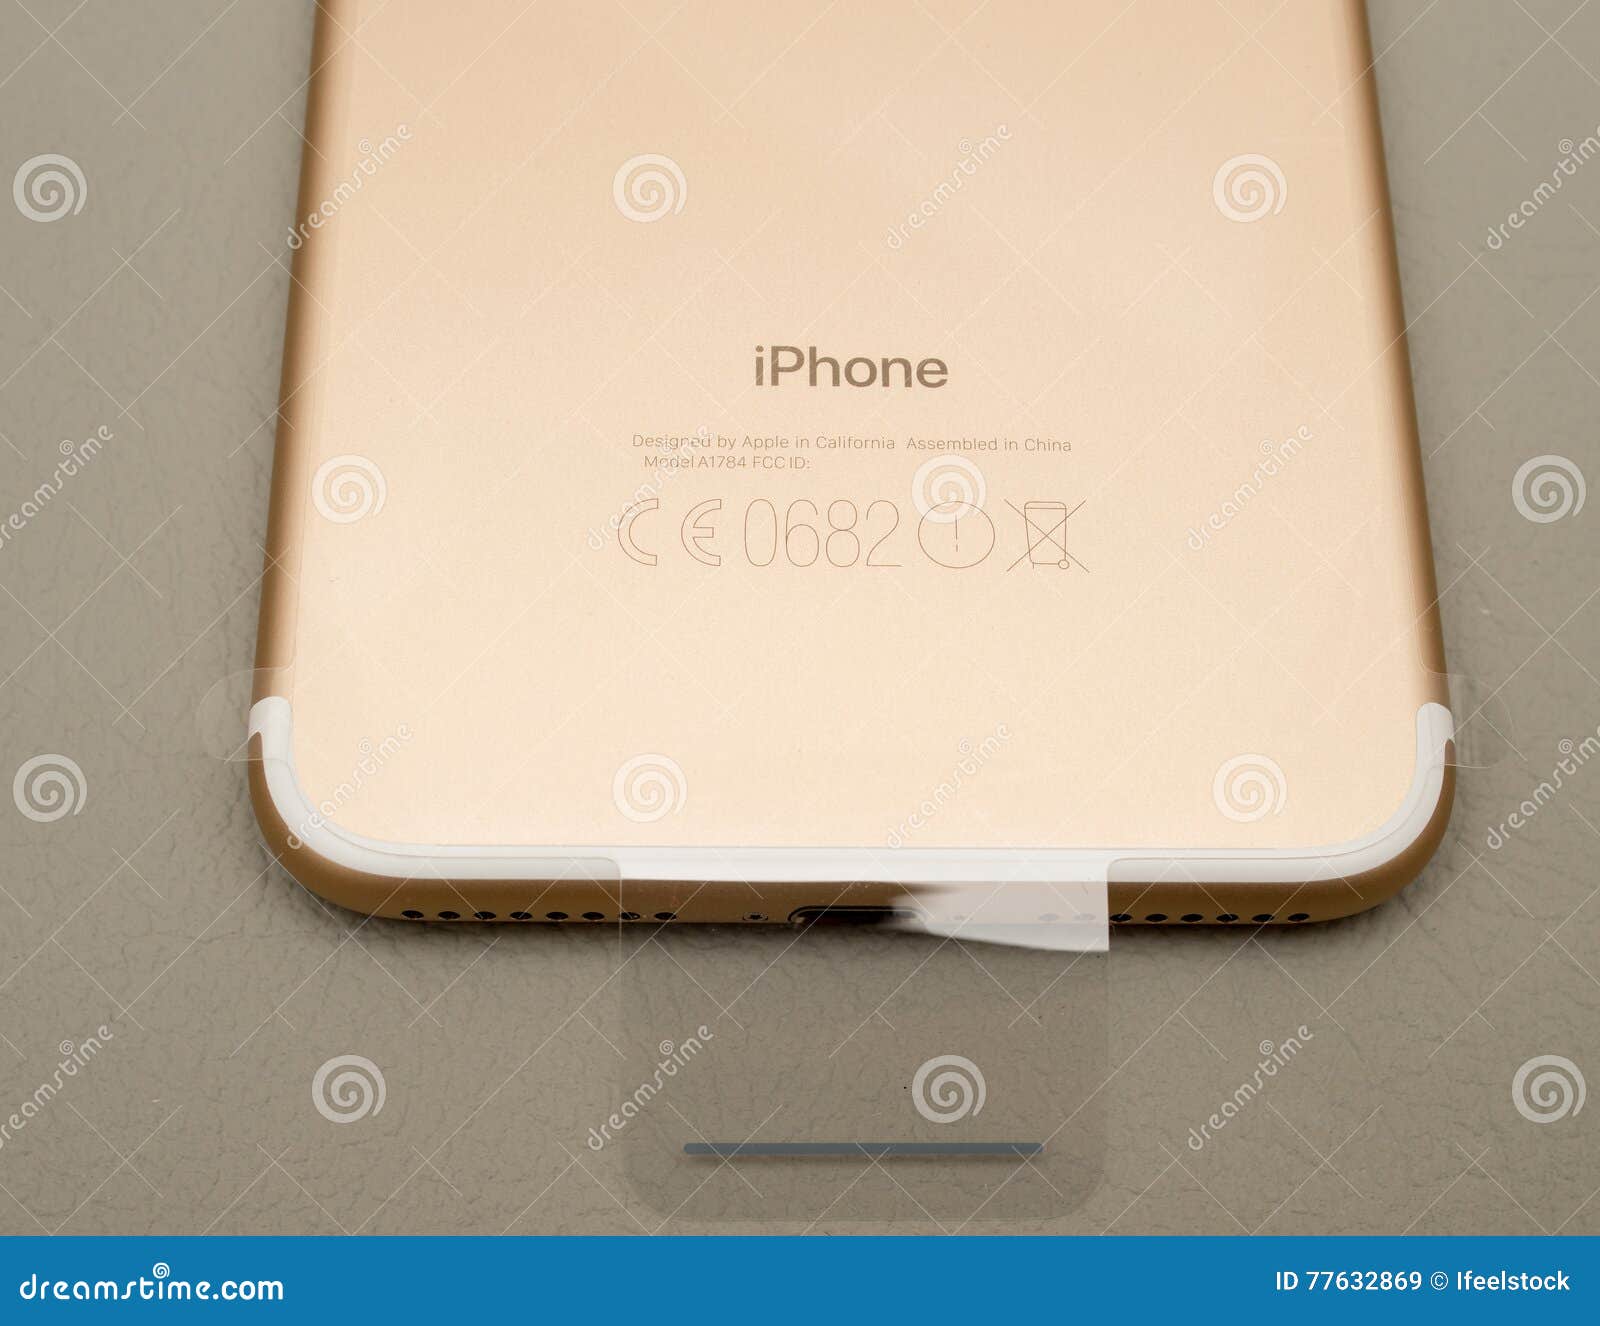 Iphone 7 Plus Dual Camera Unboxing Editorial Stock Image Image Of Electronics Computers